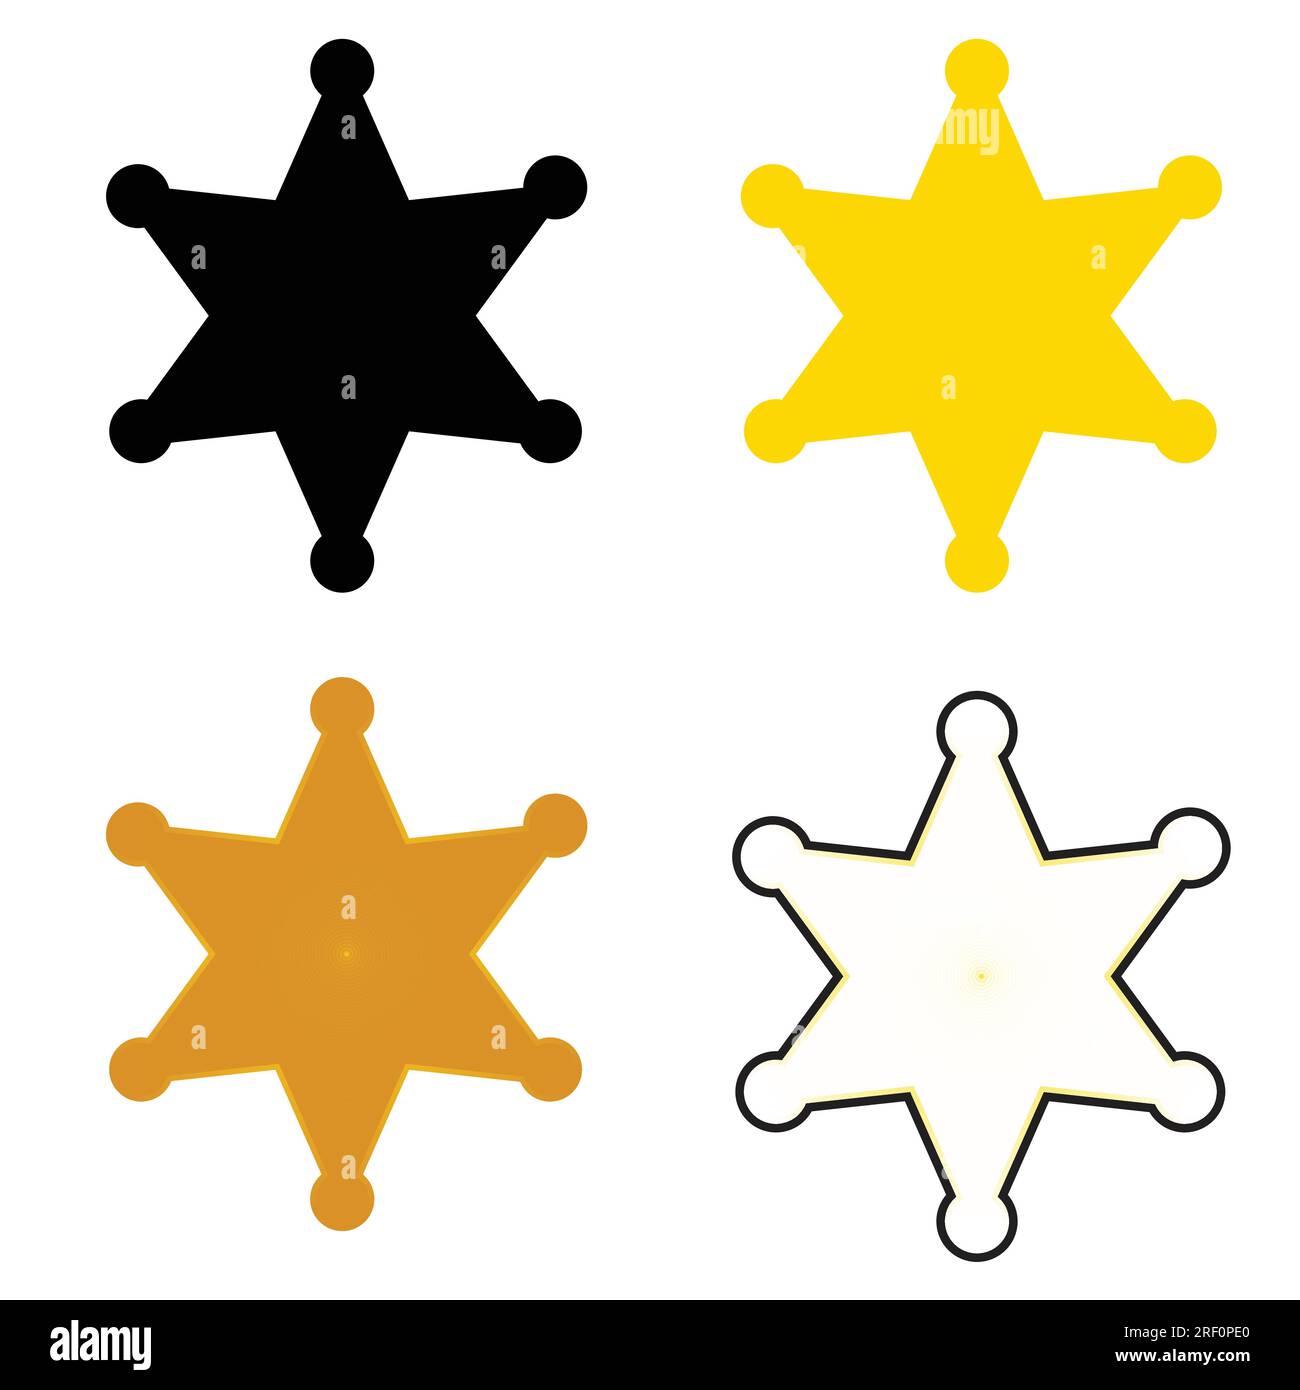 Blank cartoon sheriff's badge with different colors Stock Vector